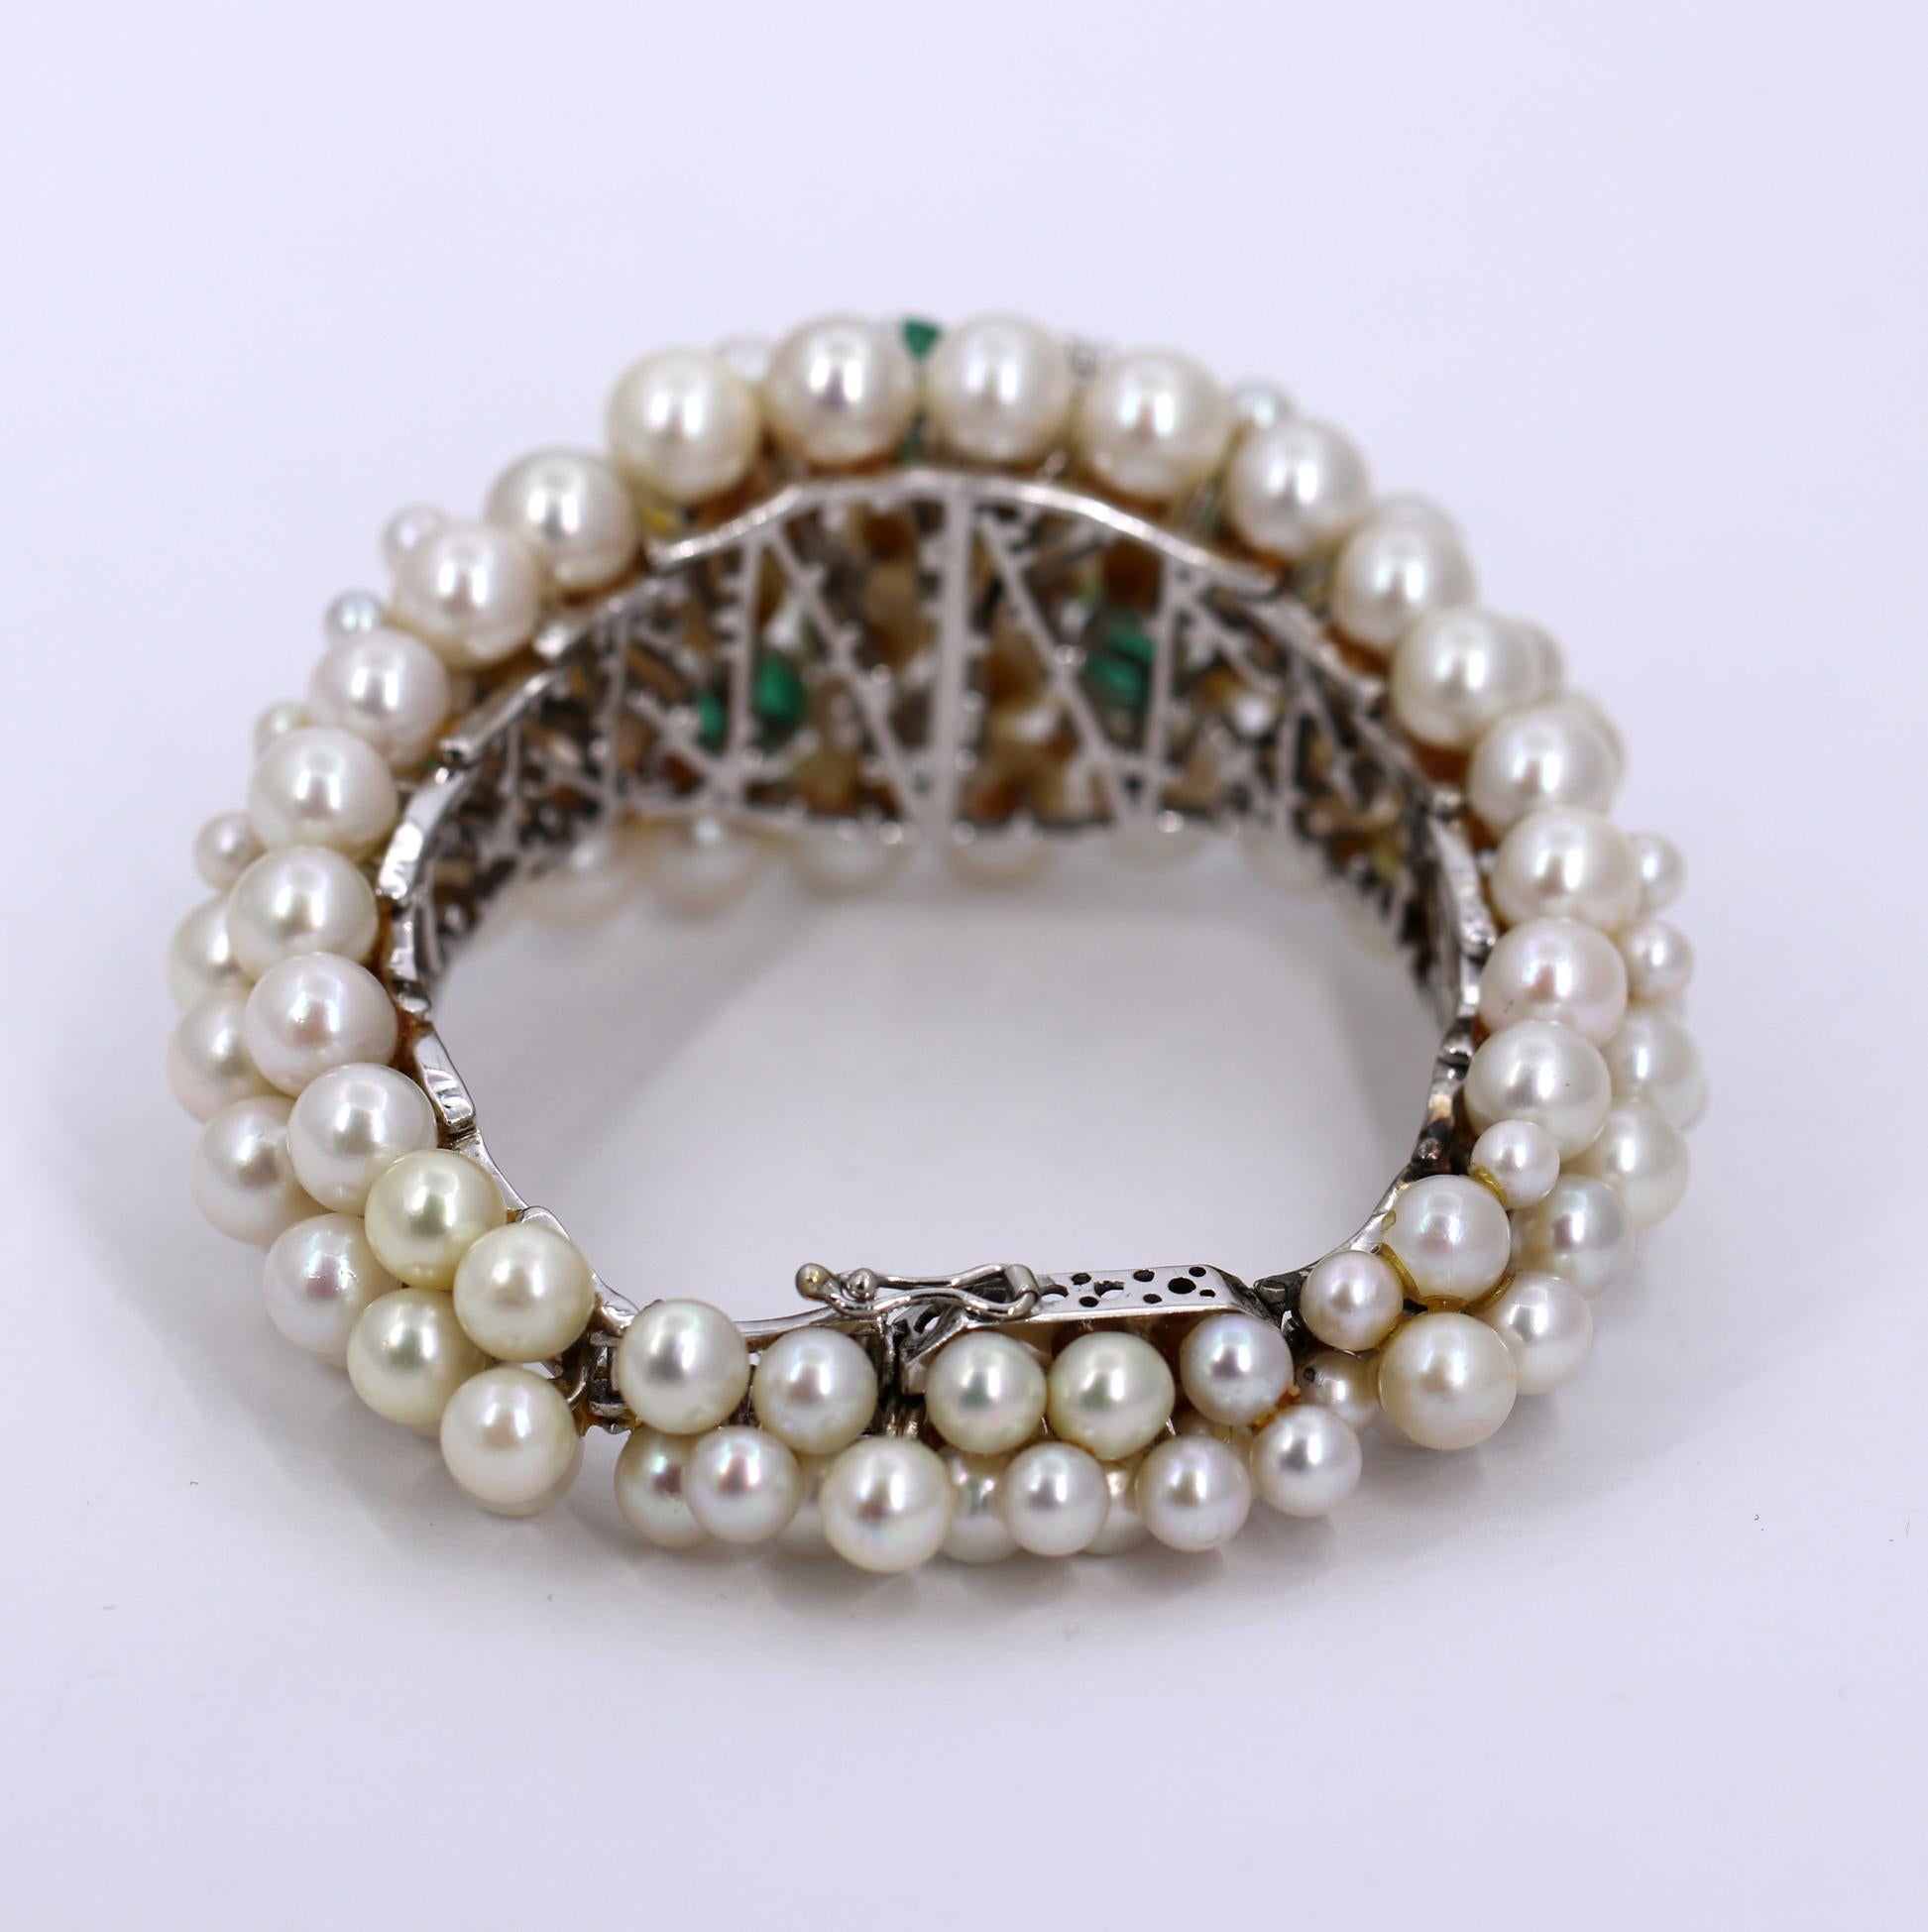 Midcentury White Gold Bracelet with Diamonds Emeralds and Pearls 1